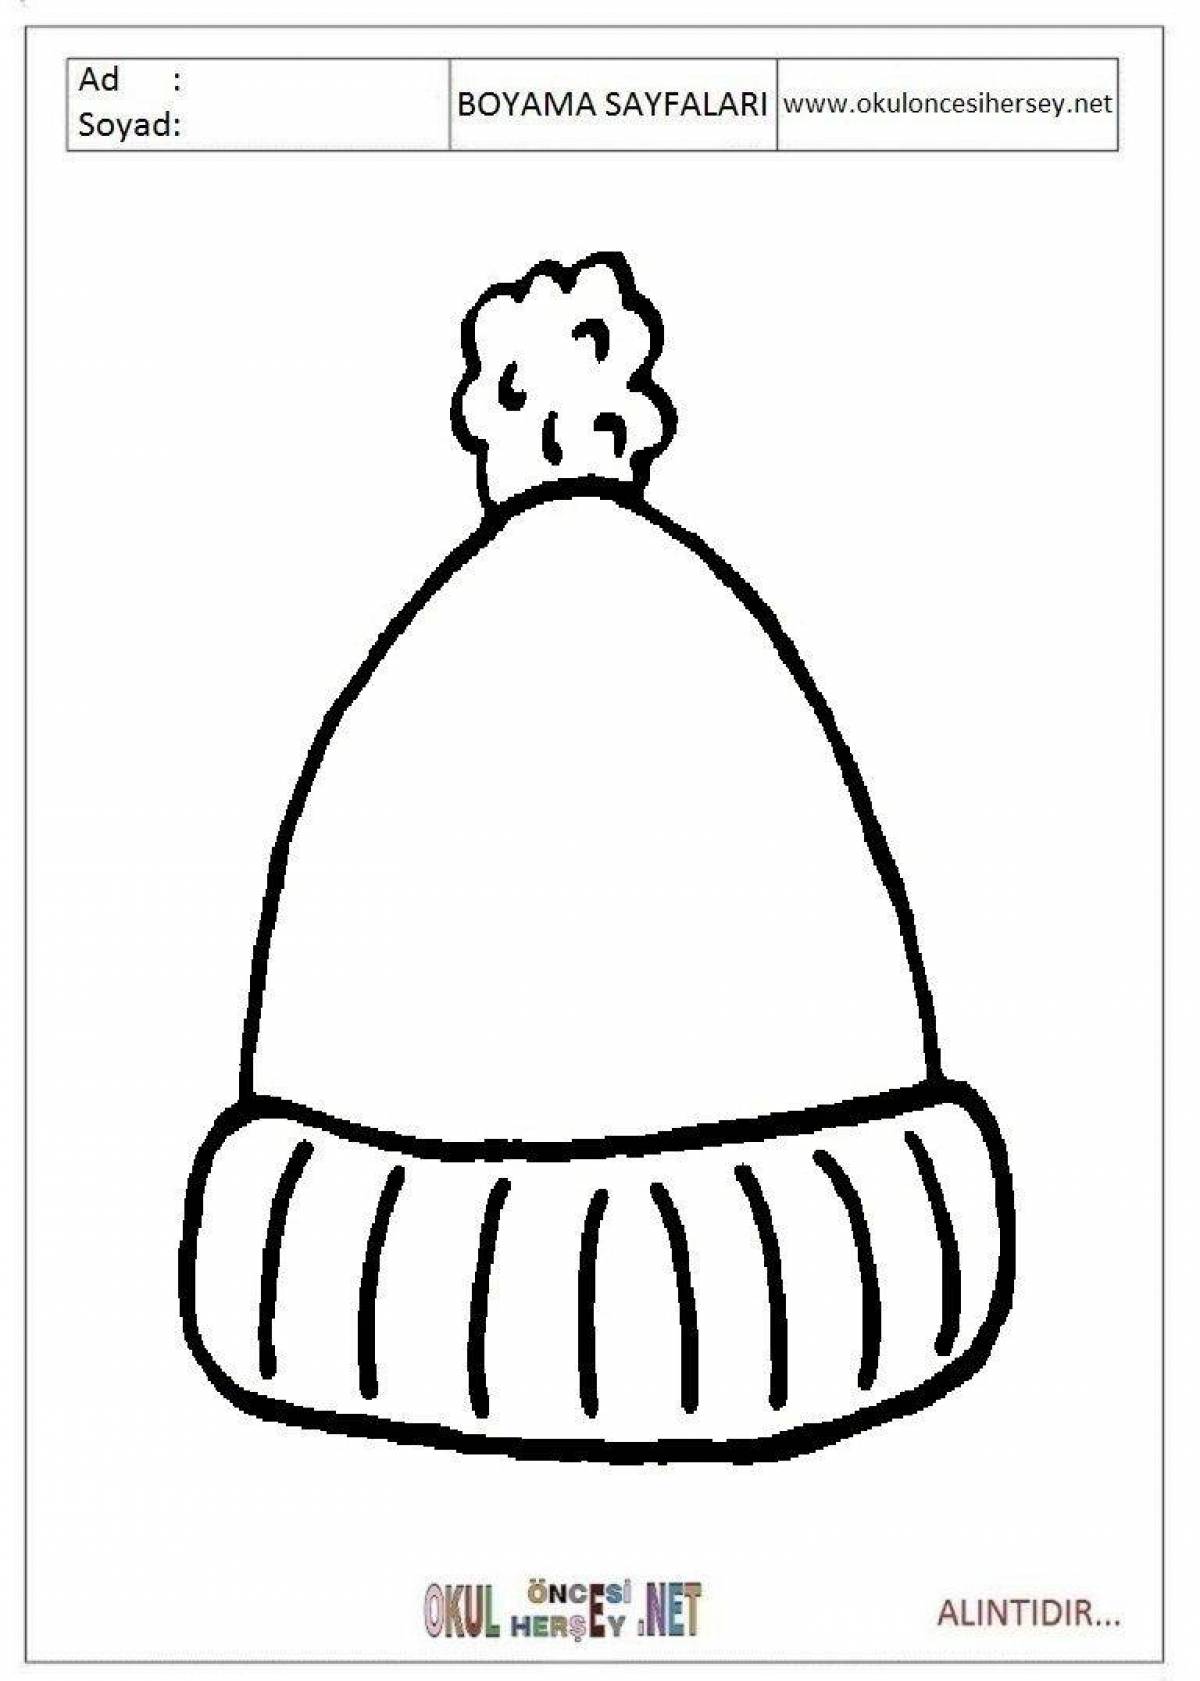 Coloring page of dazzling hat for kids